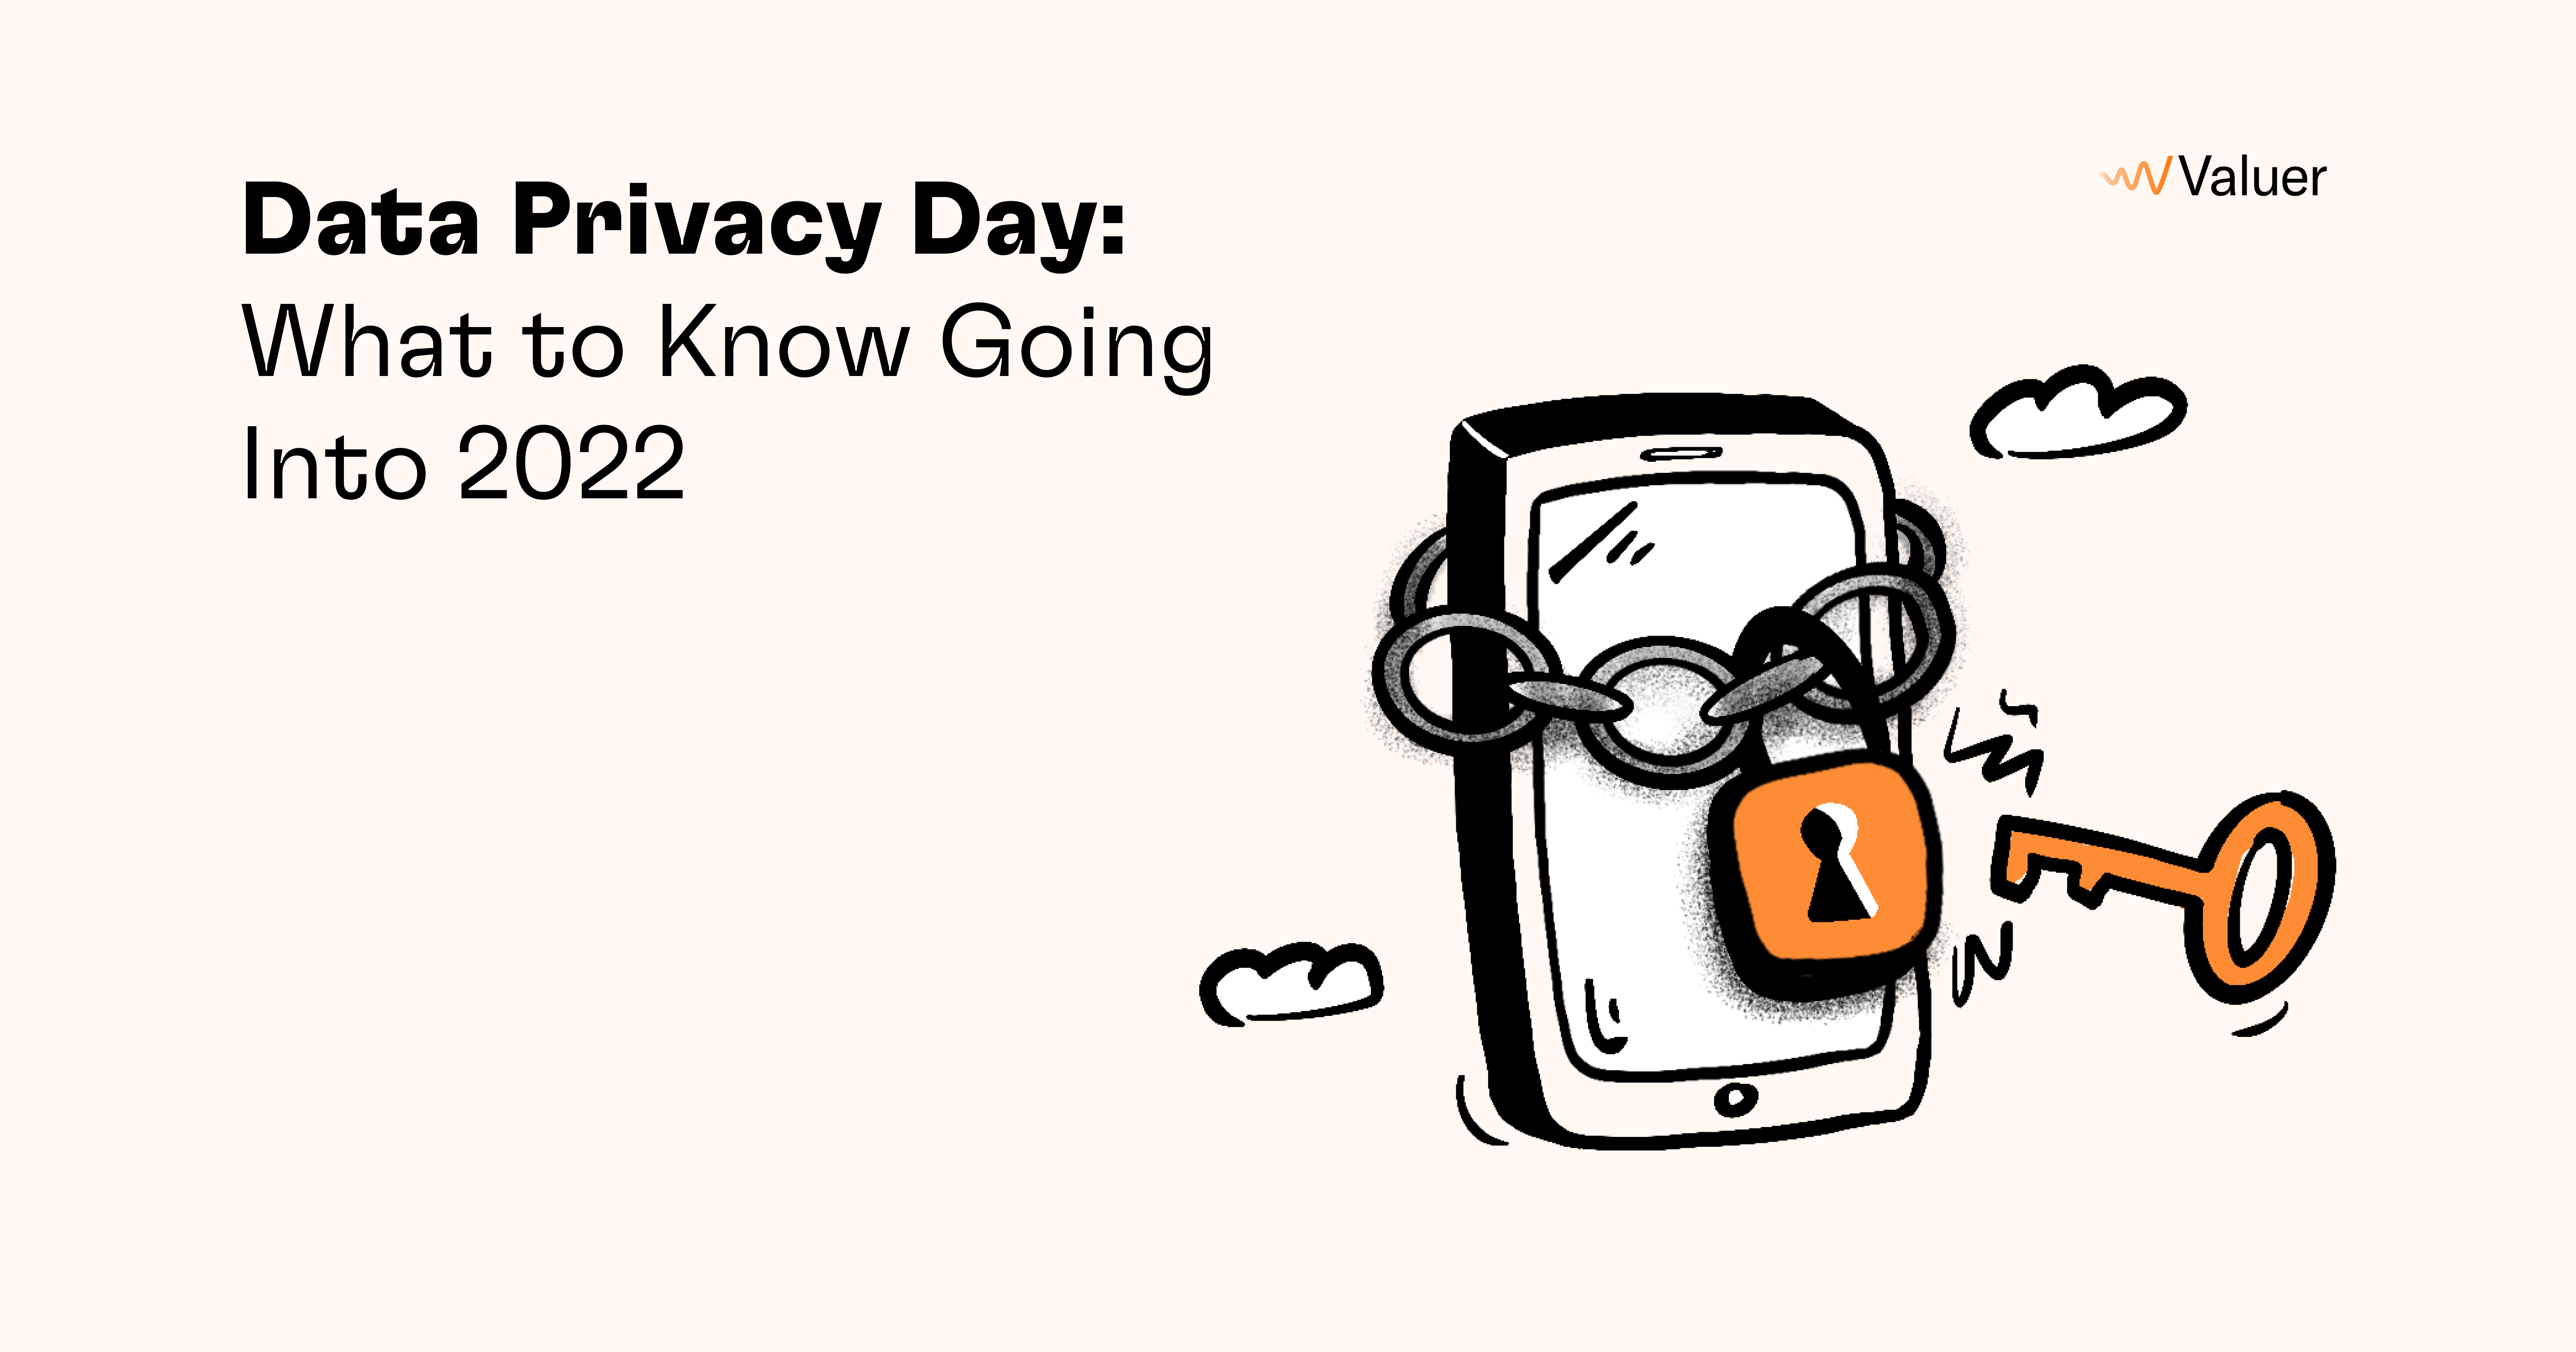 Data Privacy Day: What to Know Going Into 2022